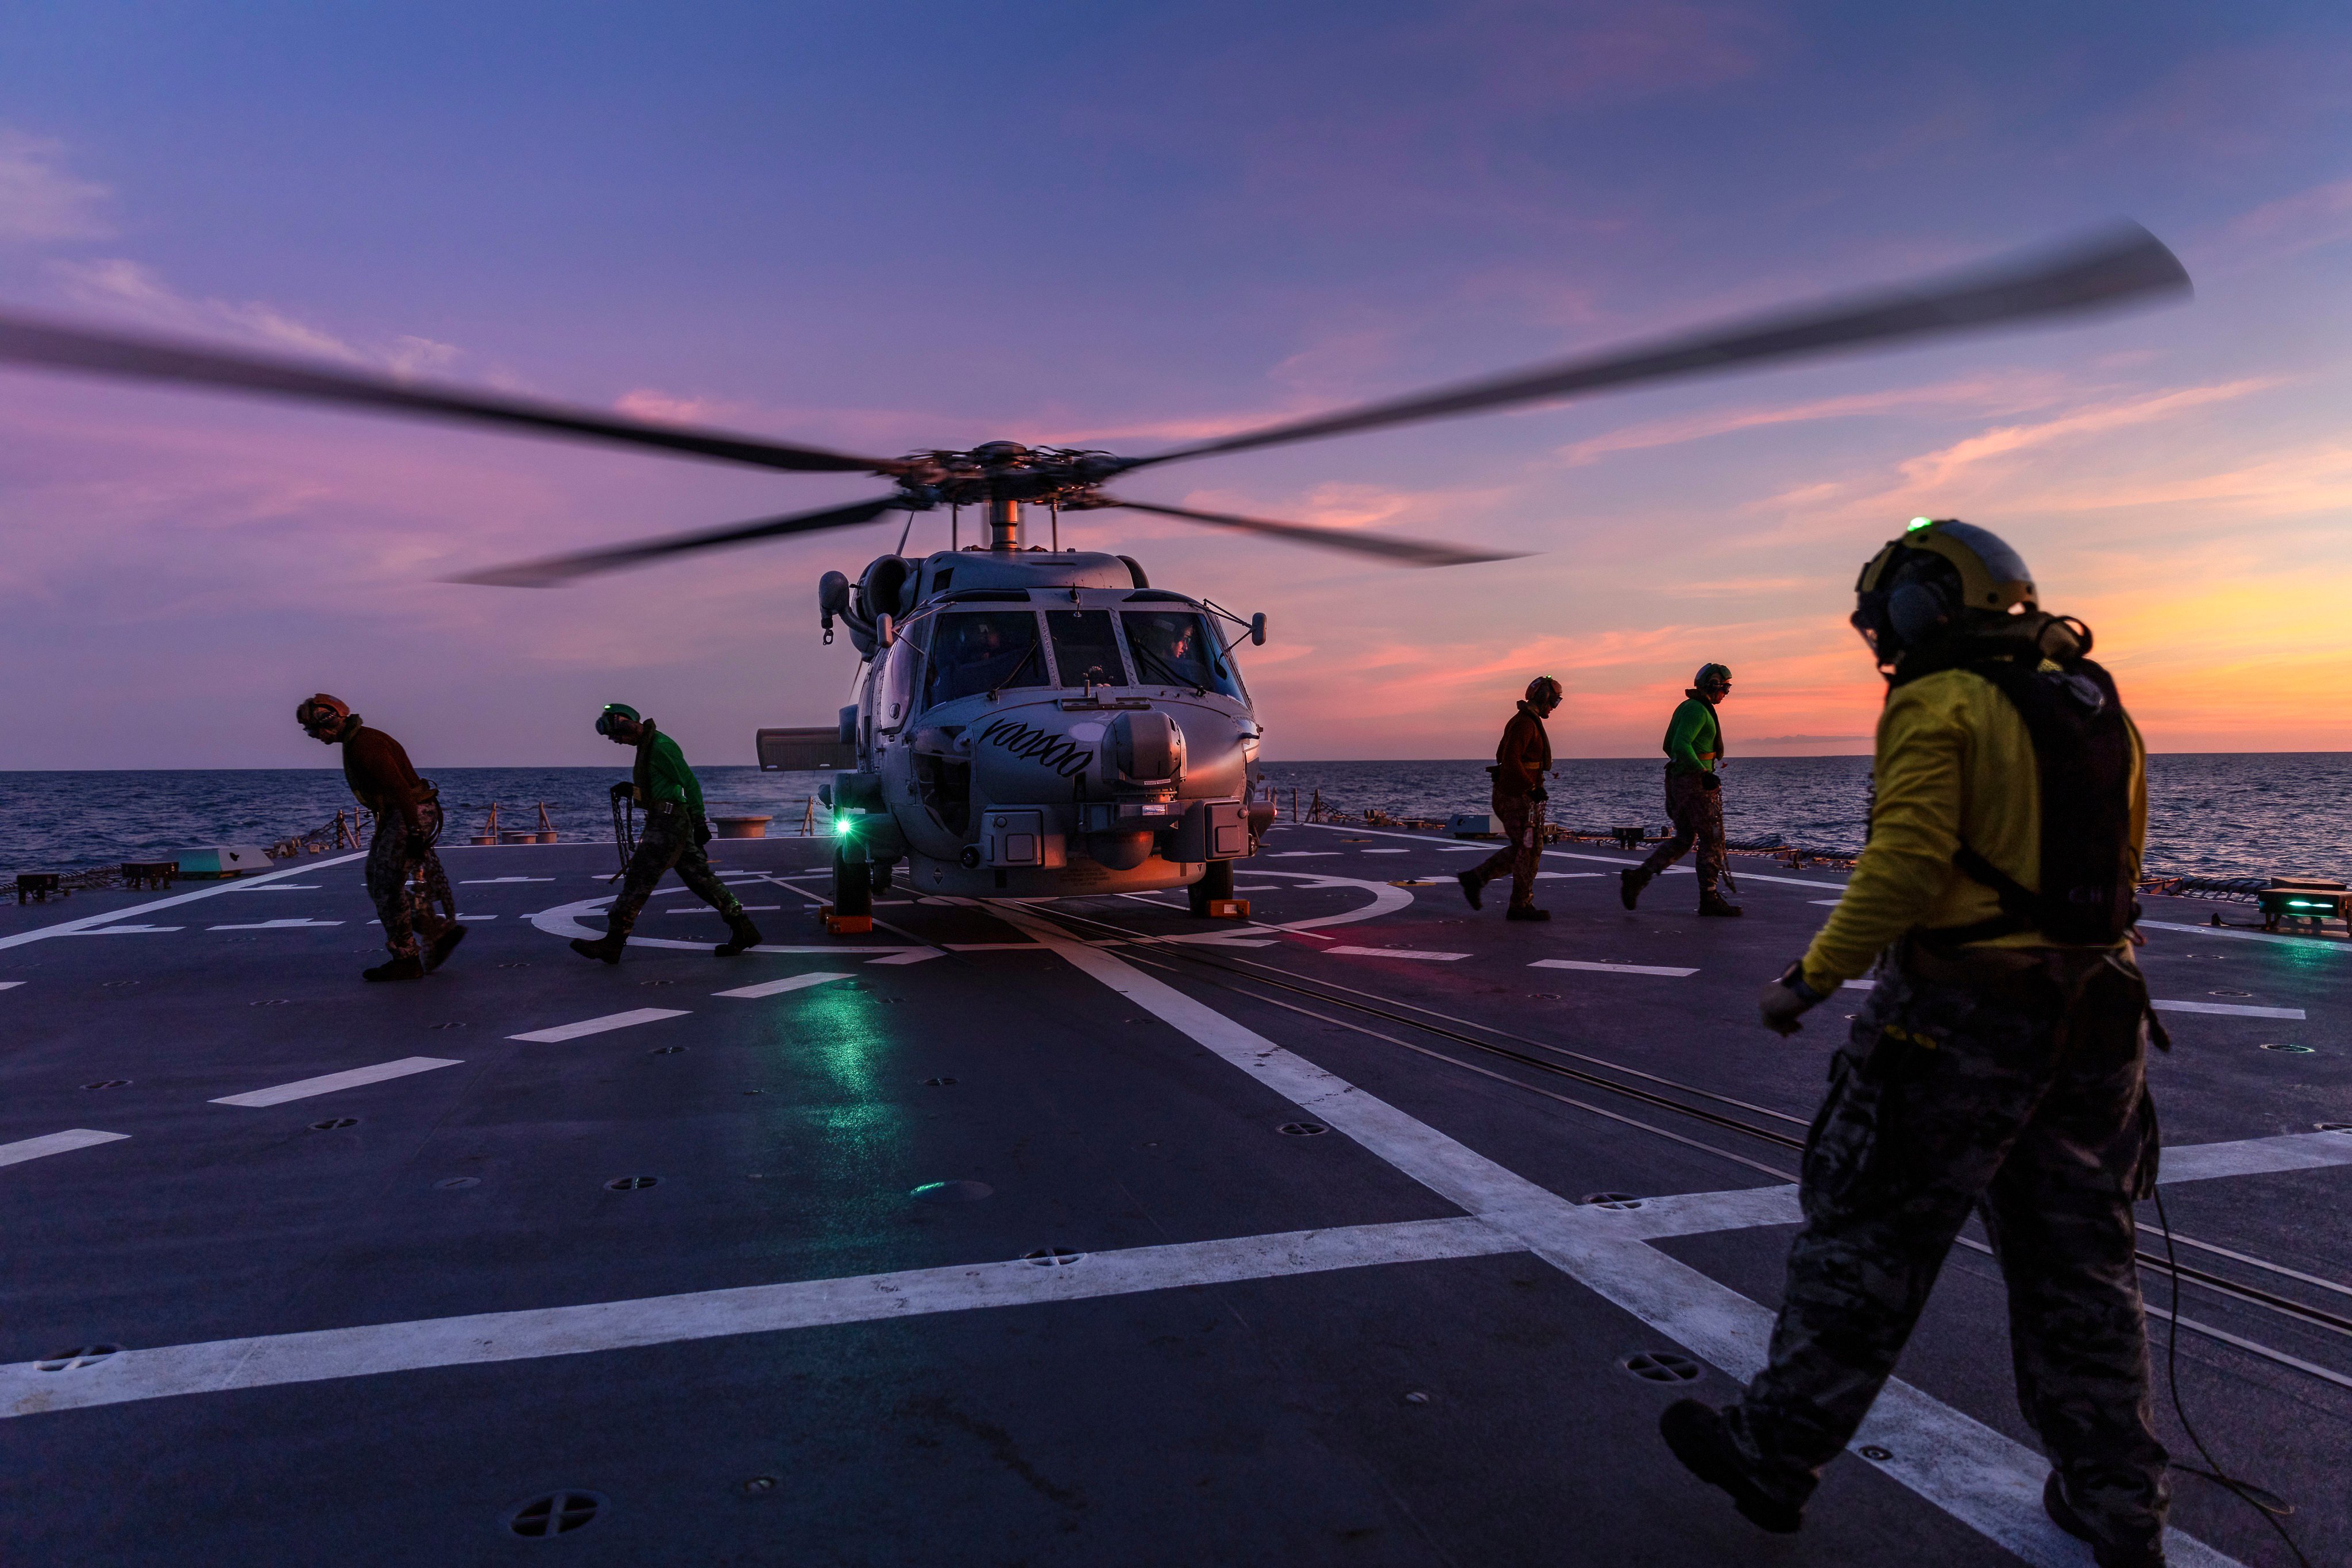 A helicopter prepares to take off from the deck of HMAS Hobart. Photo: AP